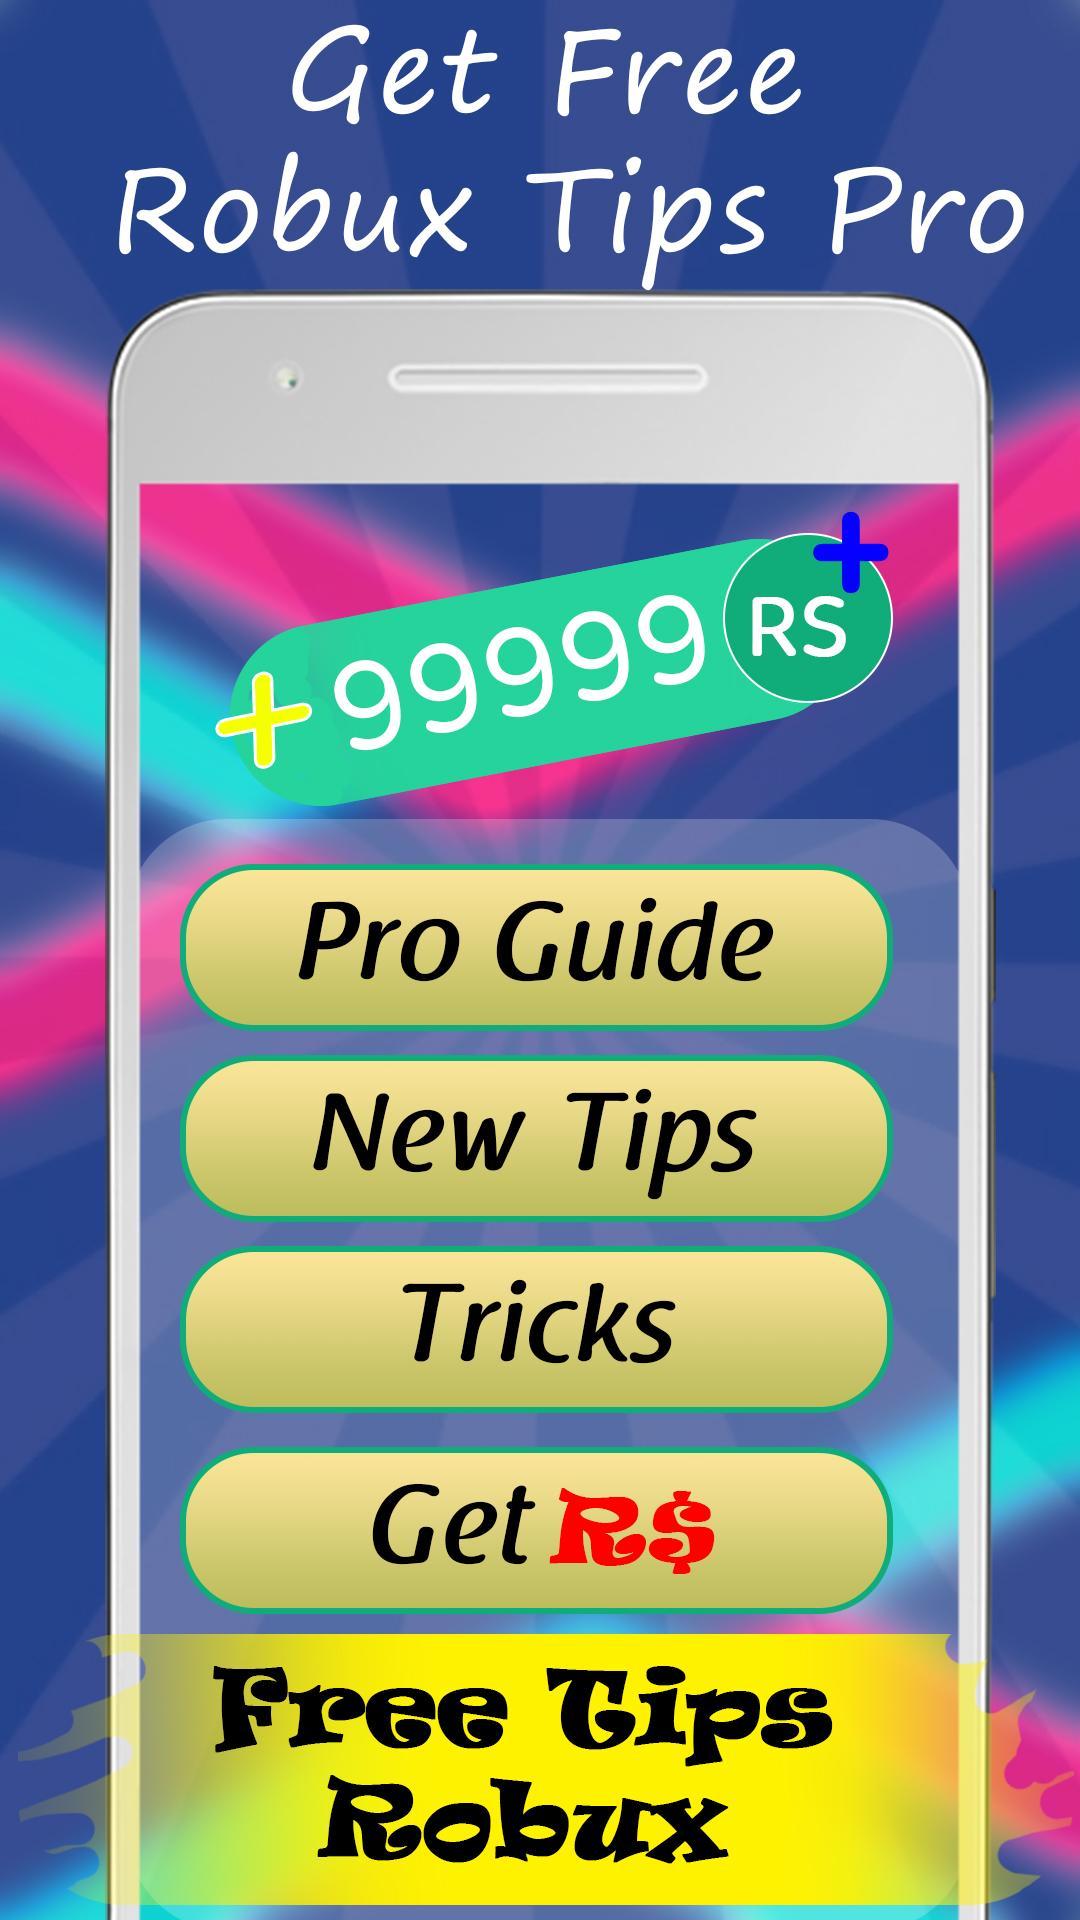 Get New Free Tips Robux For Roblox Guide 2k19 For Android Apk Download - get free robux pro tips guide robux free 2k19 1 0 apk app